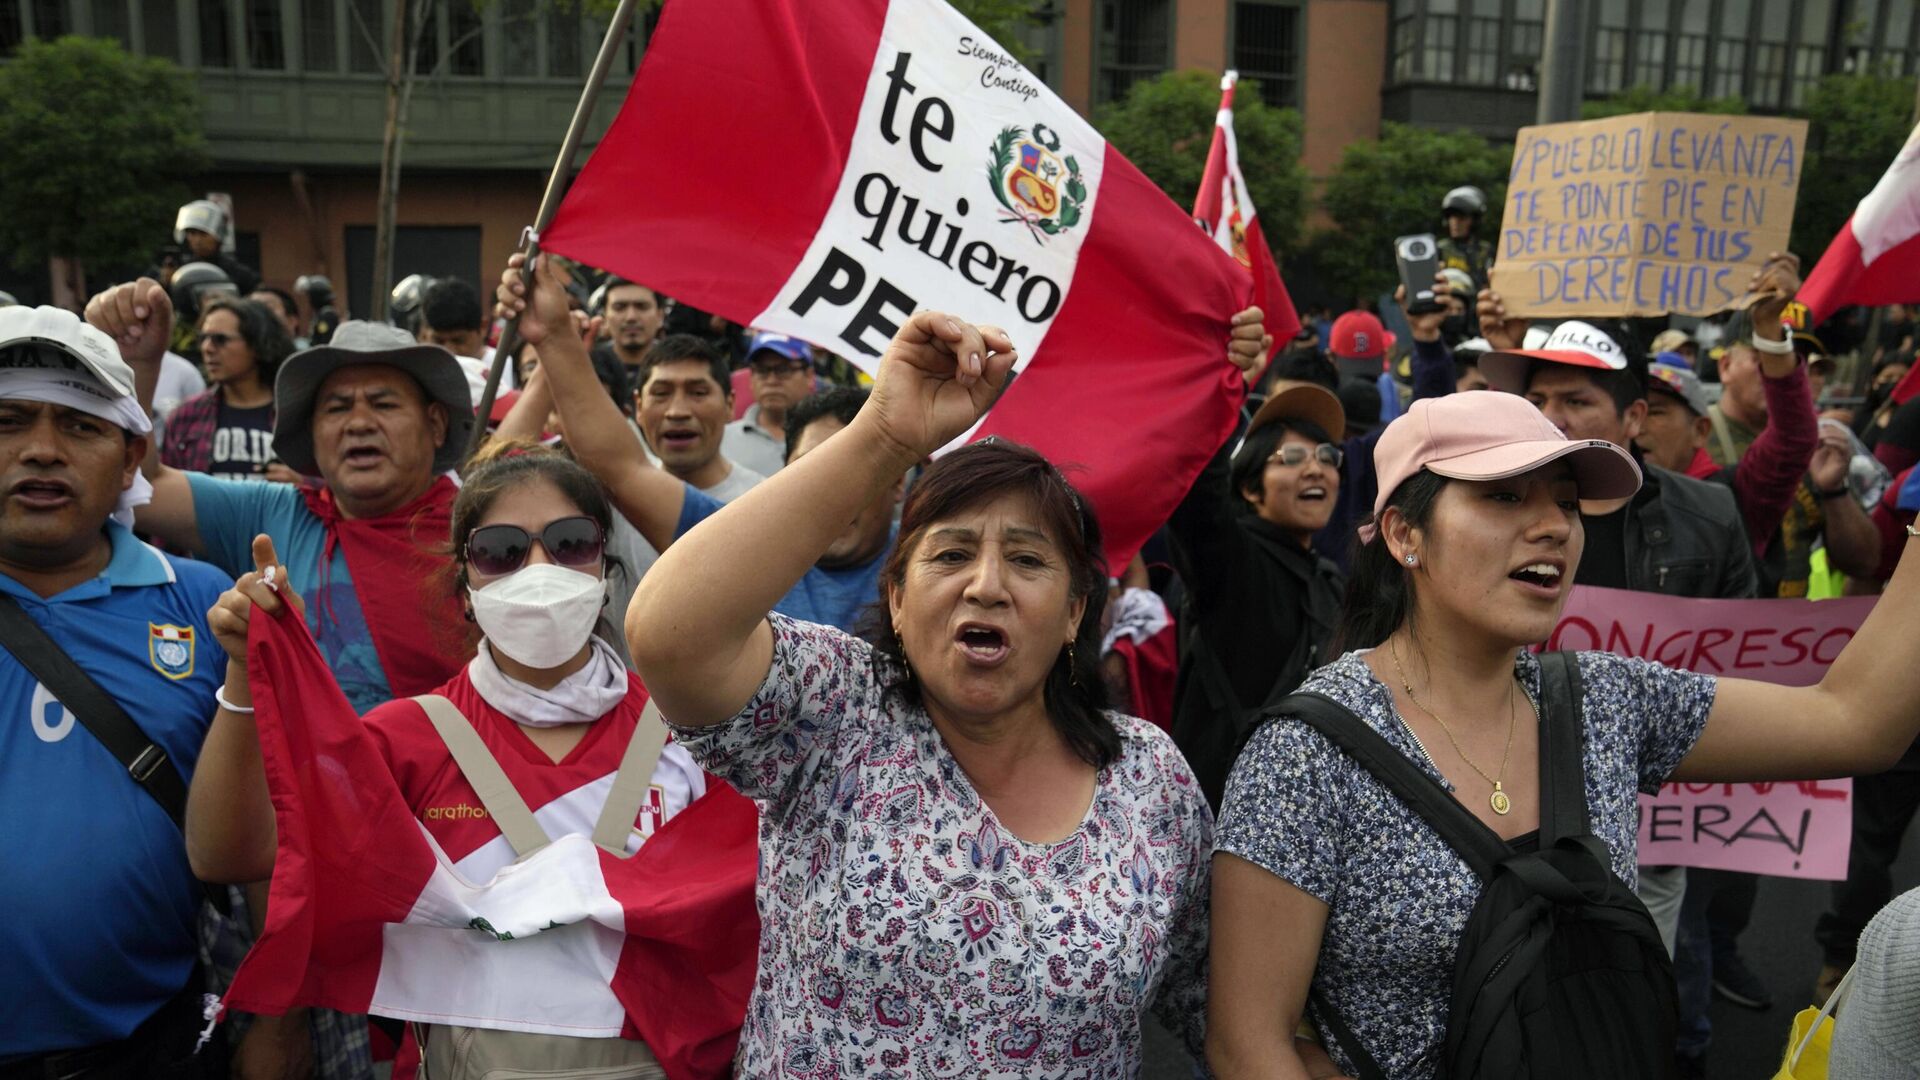 Protesters show their disapproval of the recent coup against Pedro Castillo. Photo: Sputnik.